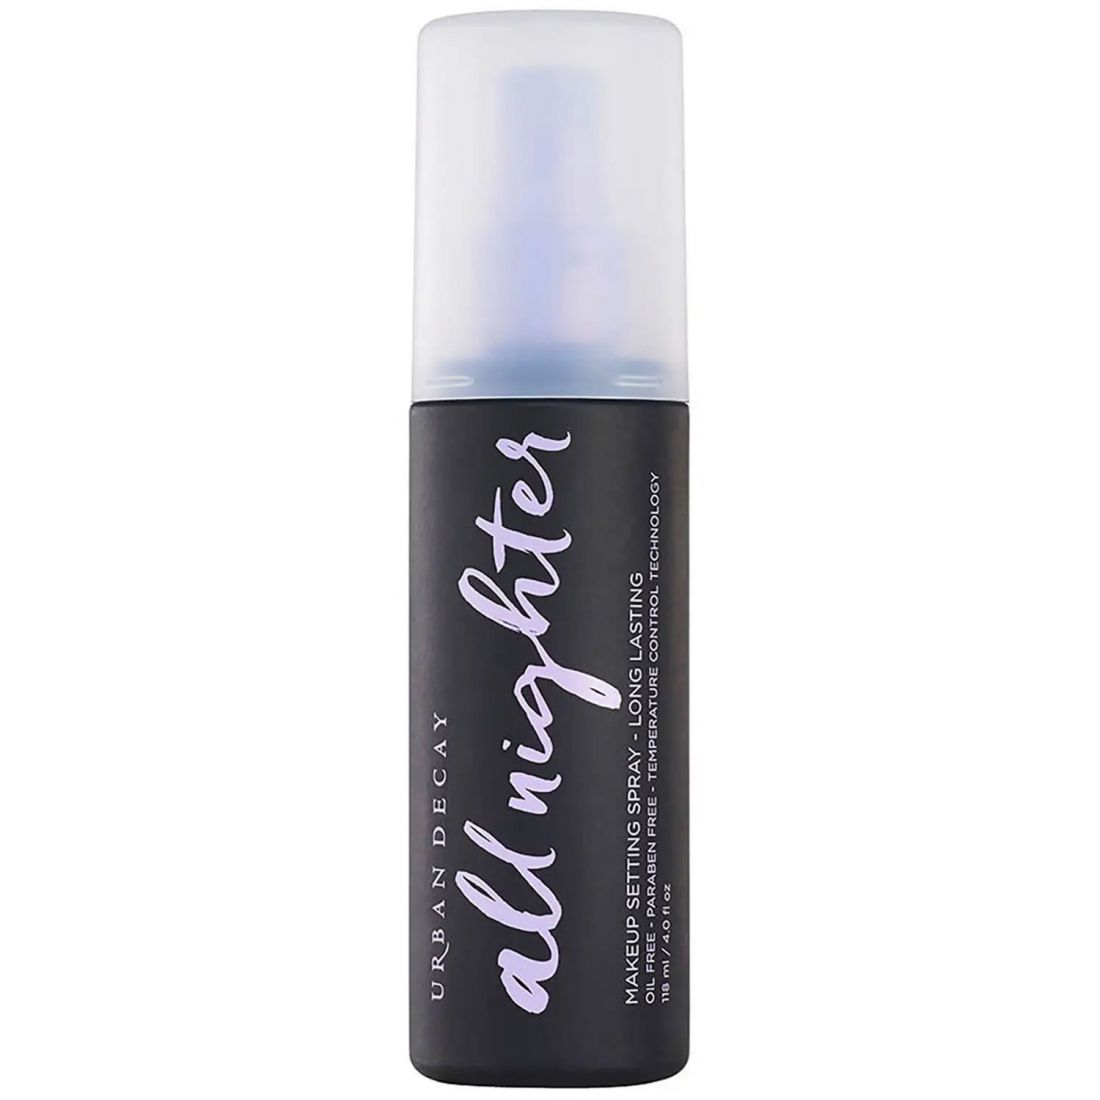 Urban Decay - Spray fixateur de maquillage 'All Nighter Long Lasting' - 118 ml